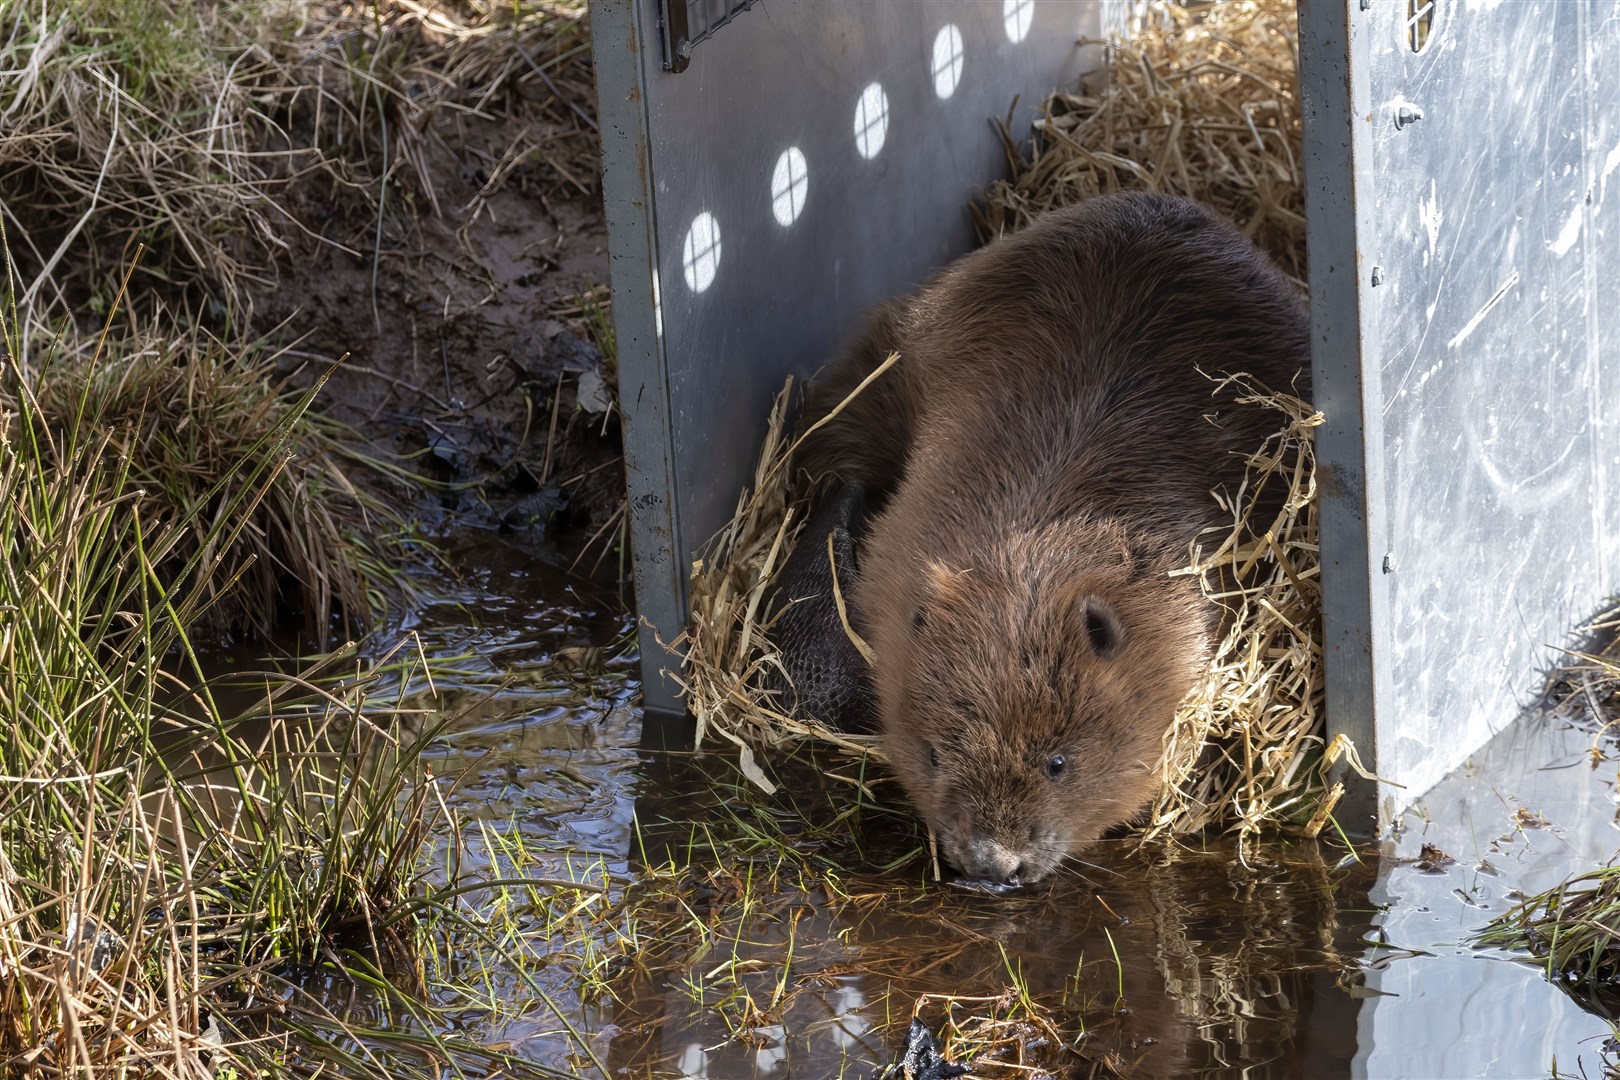 A male beaver leaves its cage to explore its new surroundings at Insh Marshes.